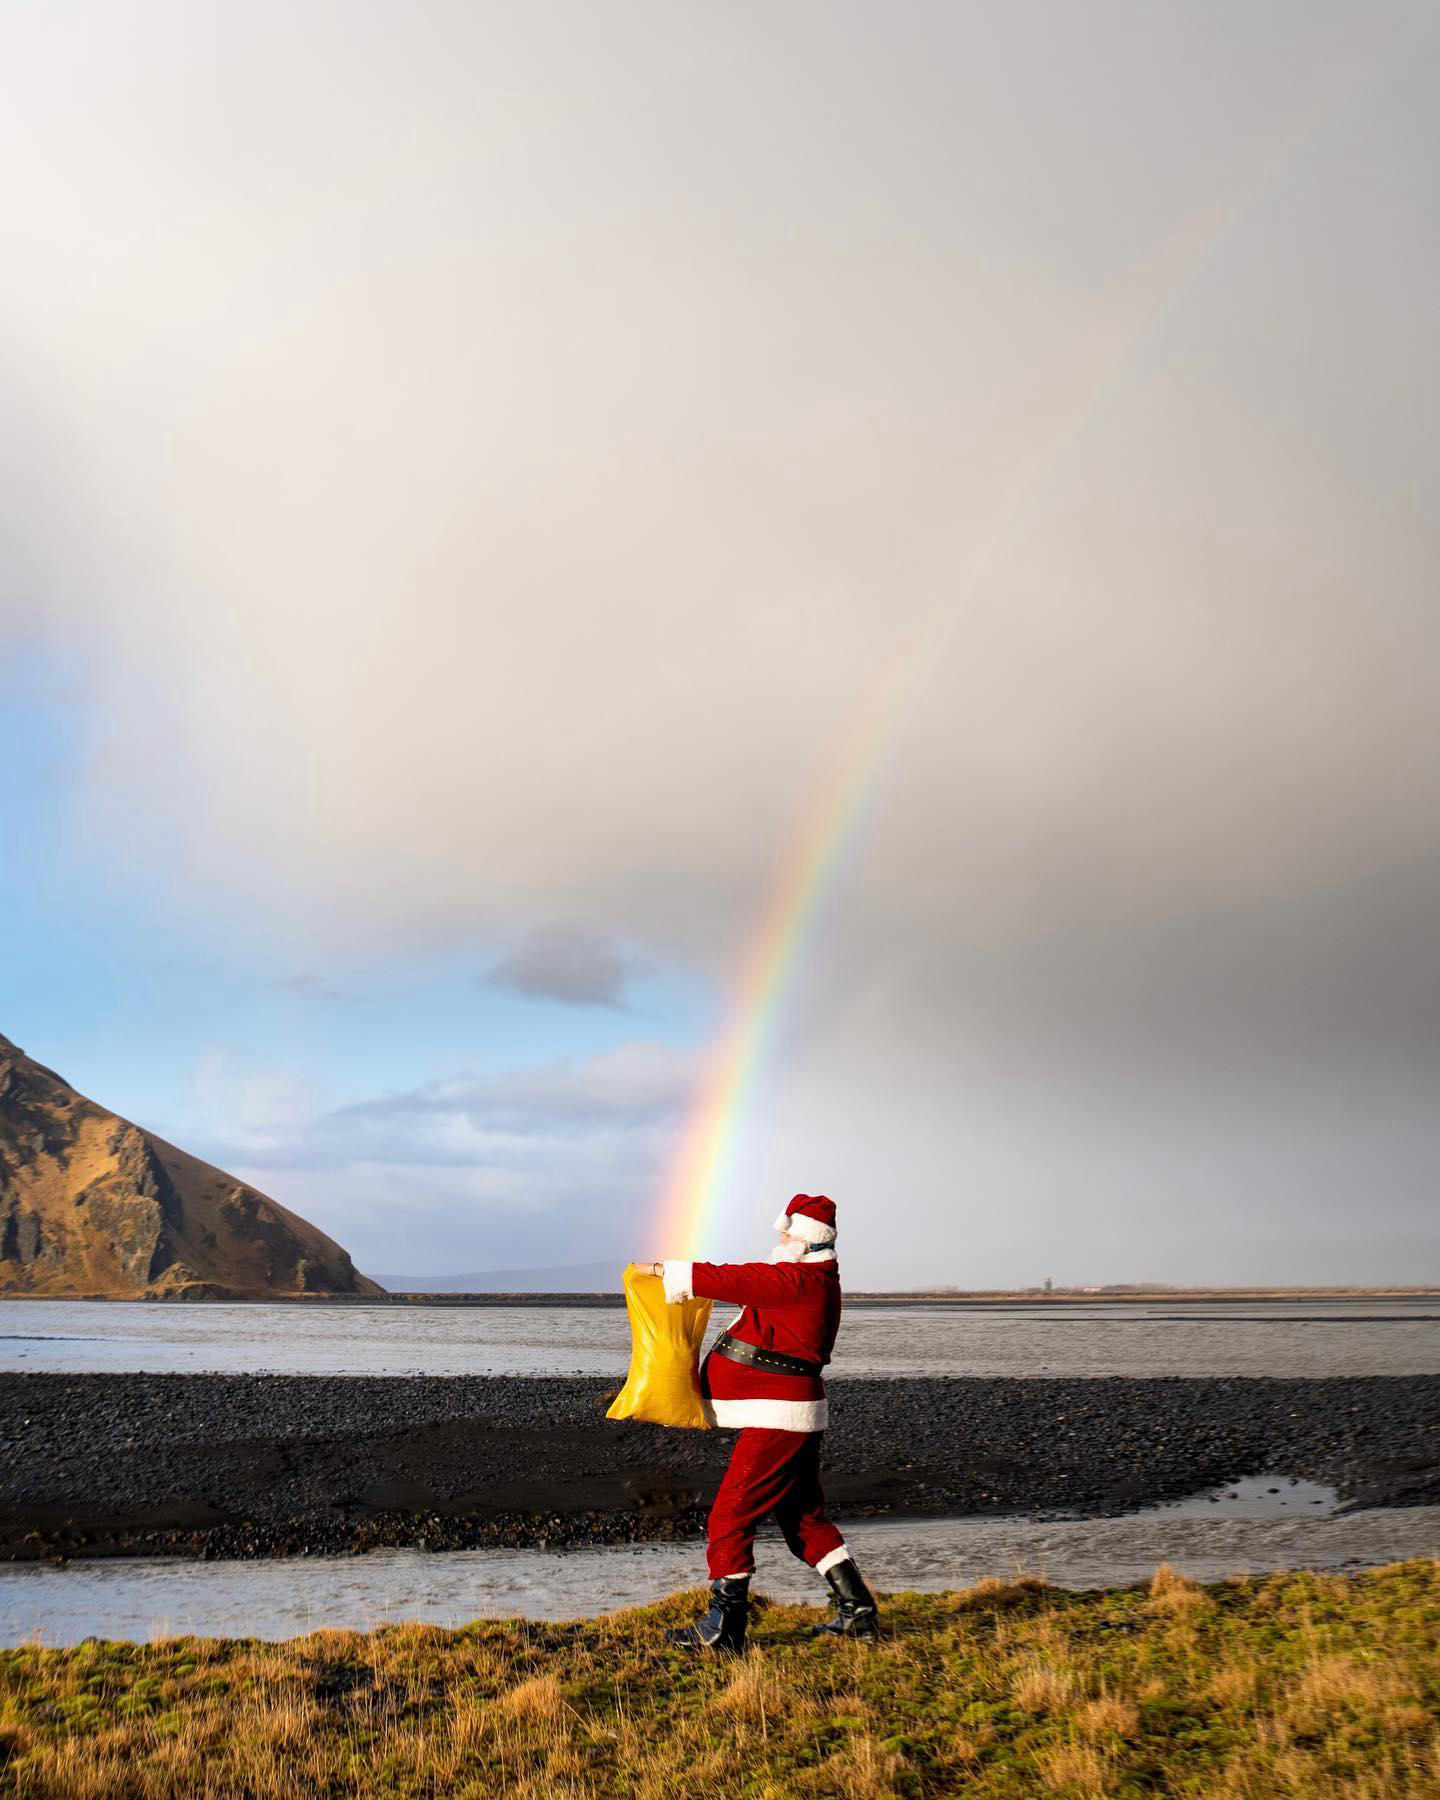 image  1 ChrisBurkard - Despite losing his reindeer in Iceland, Santa found the best kind of gift to leave un